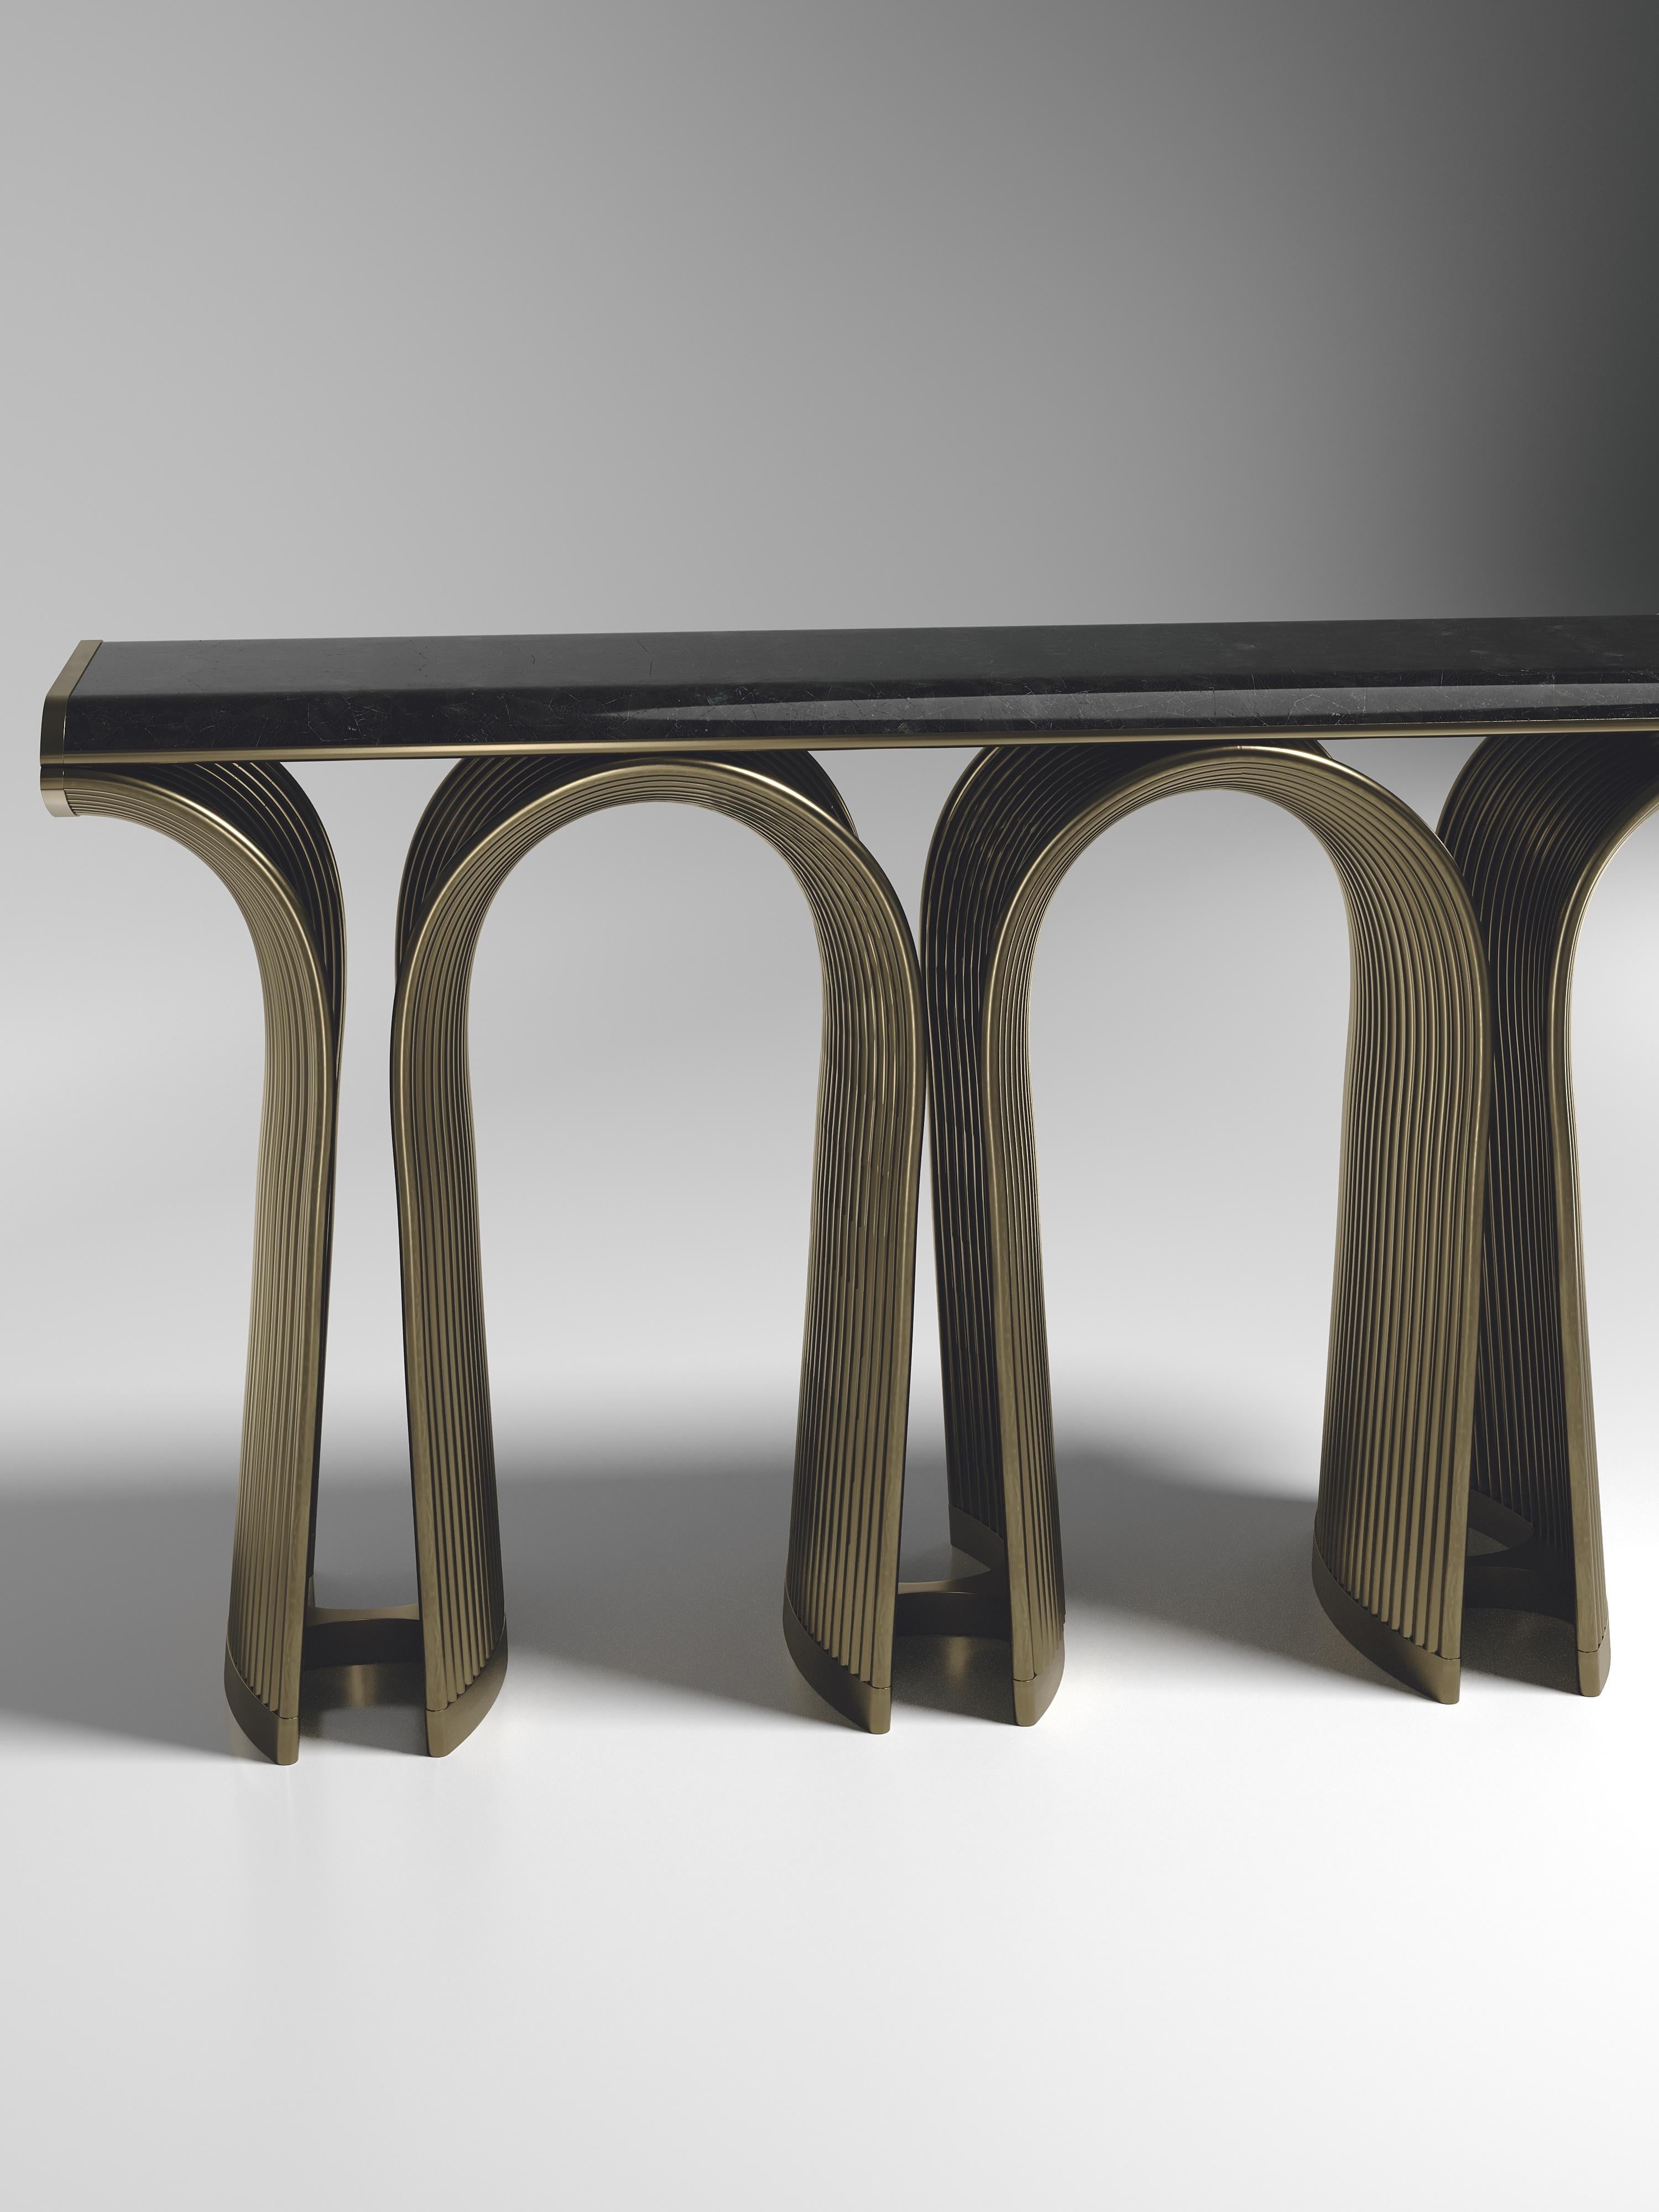 The Nymphea console by R&Y Augousti in black pen shell with bronze-patina brass details explores the brand's iconic DNA of bringing old world artisanal craft into a contemporary and utterly luxury feel. The base of the console is handcrafted with